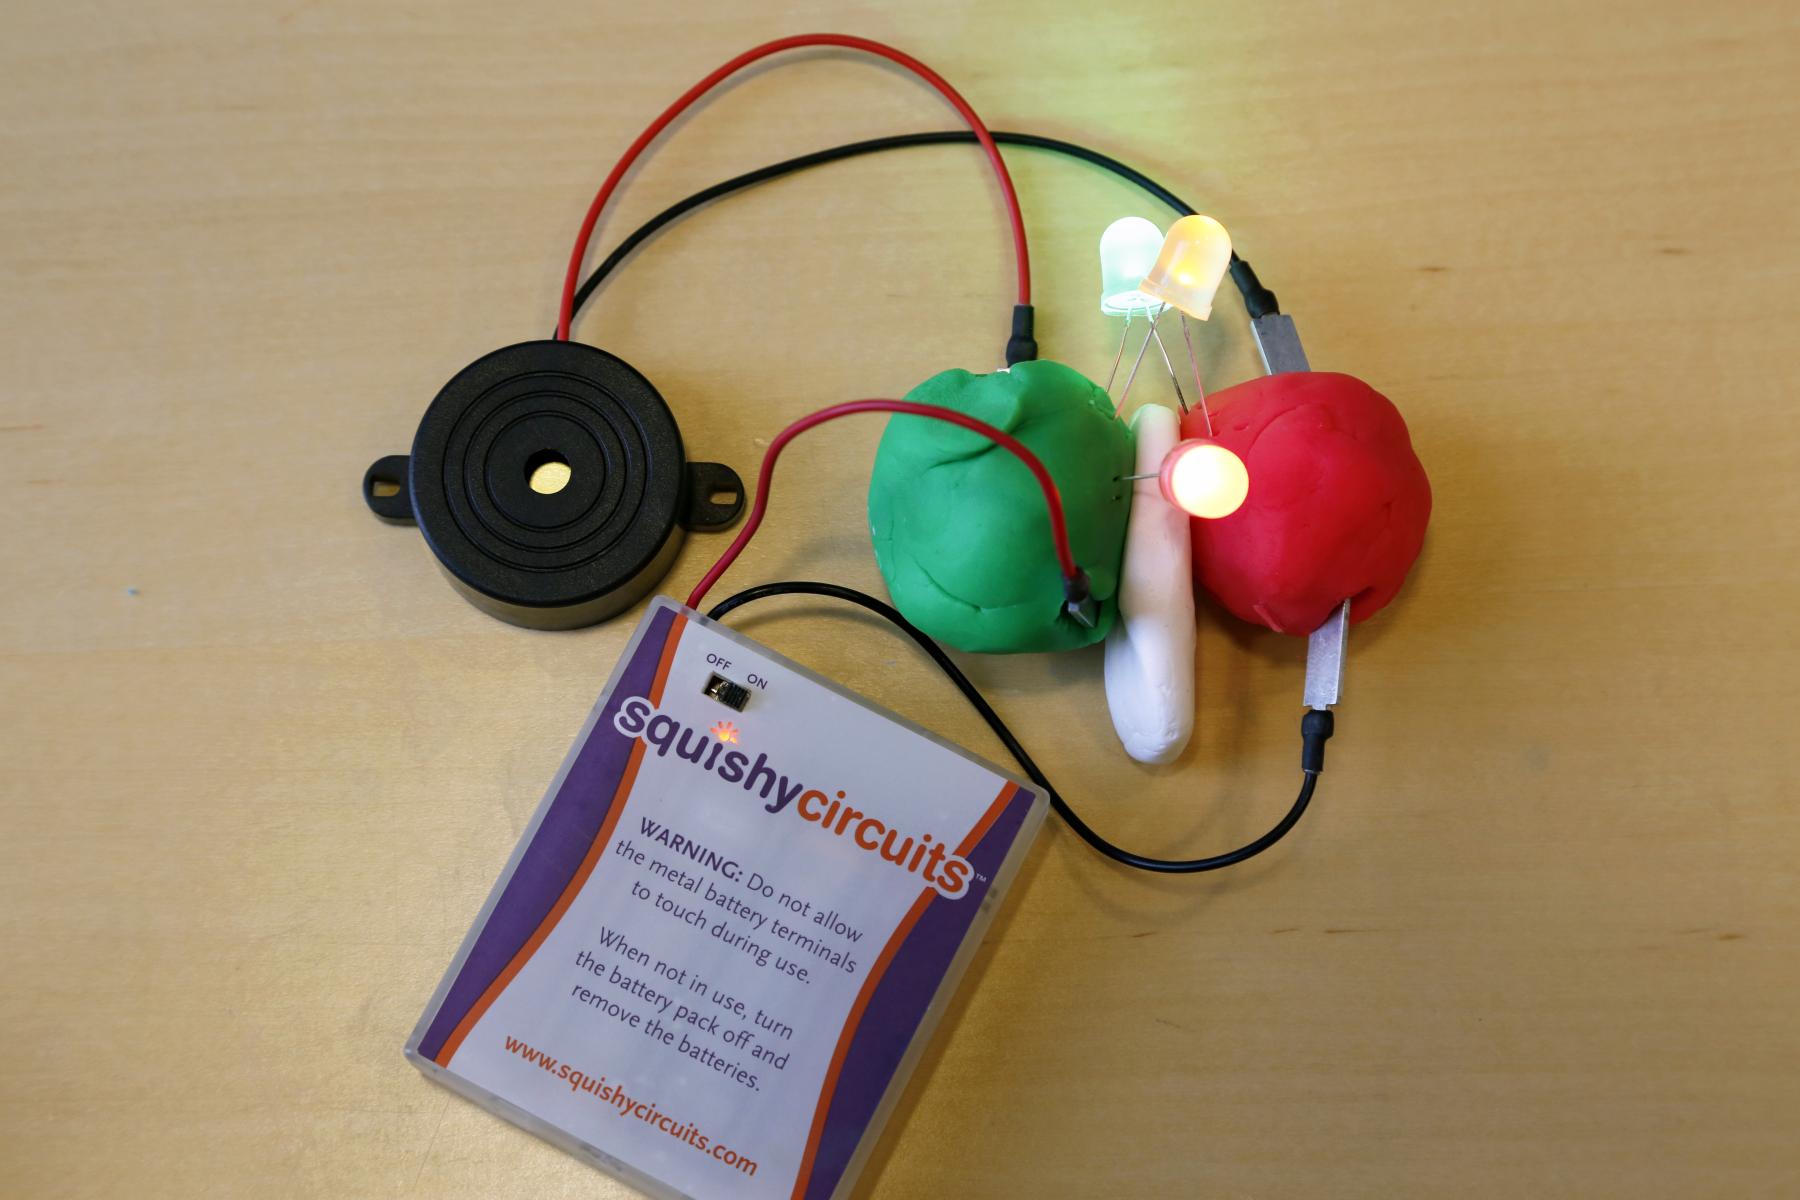 Lights, buzzer, and squishy circuit battery pack with wires connected to dough